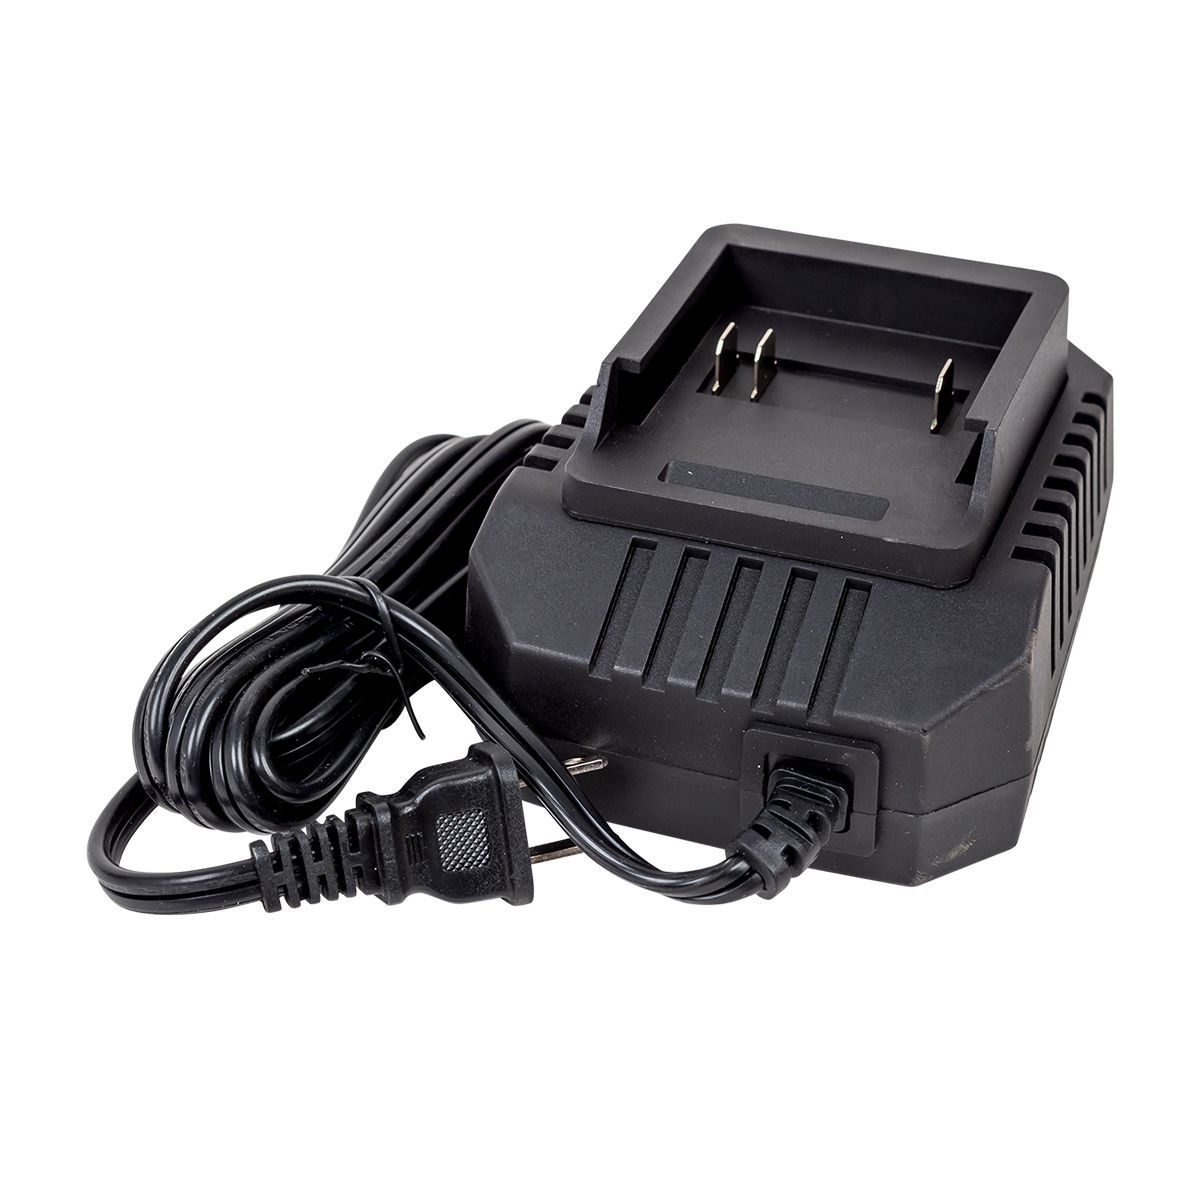 Charger For Rd8803/Rd8804